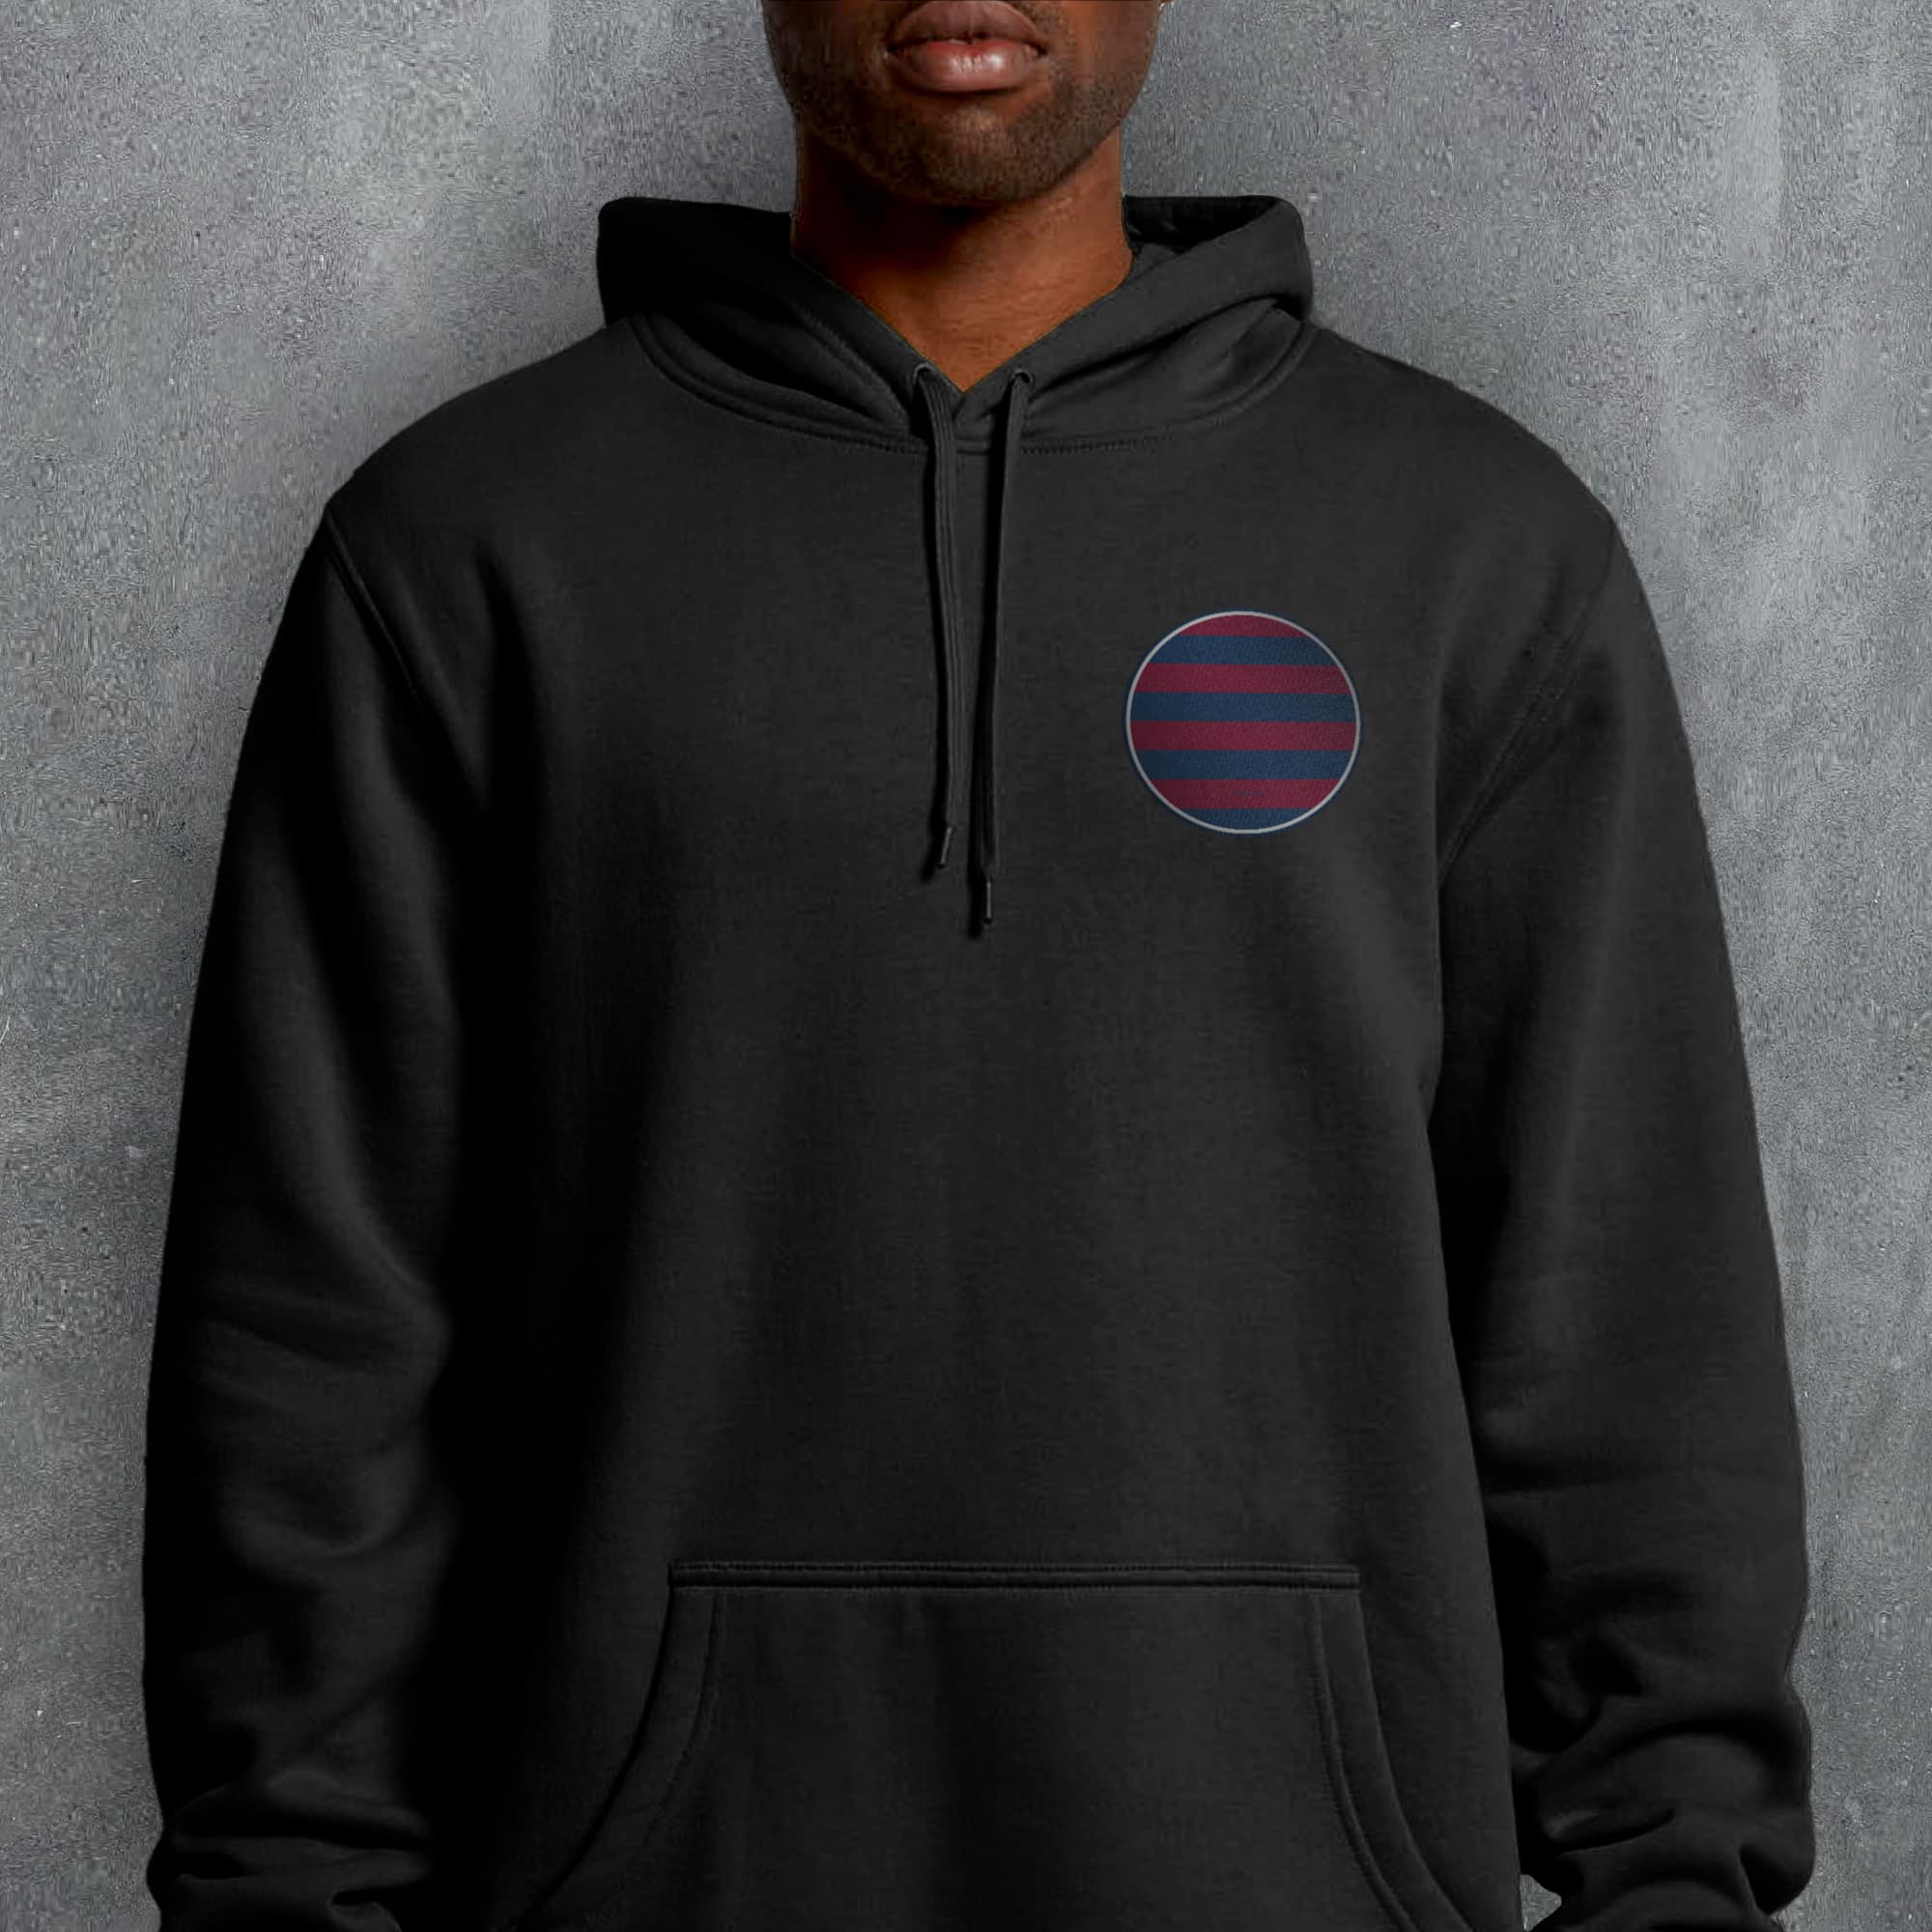 a man wearing a black hoodie with a red and blue circle on it